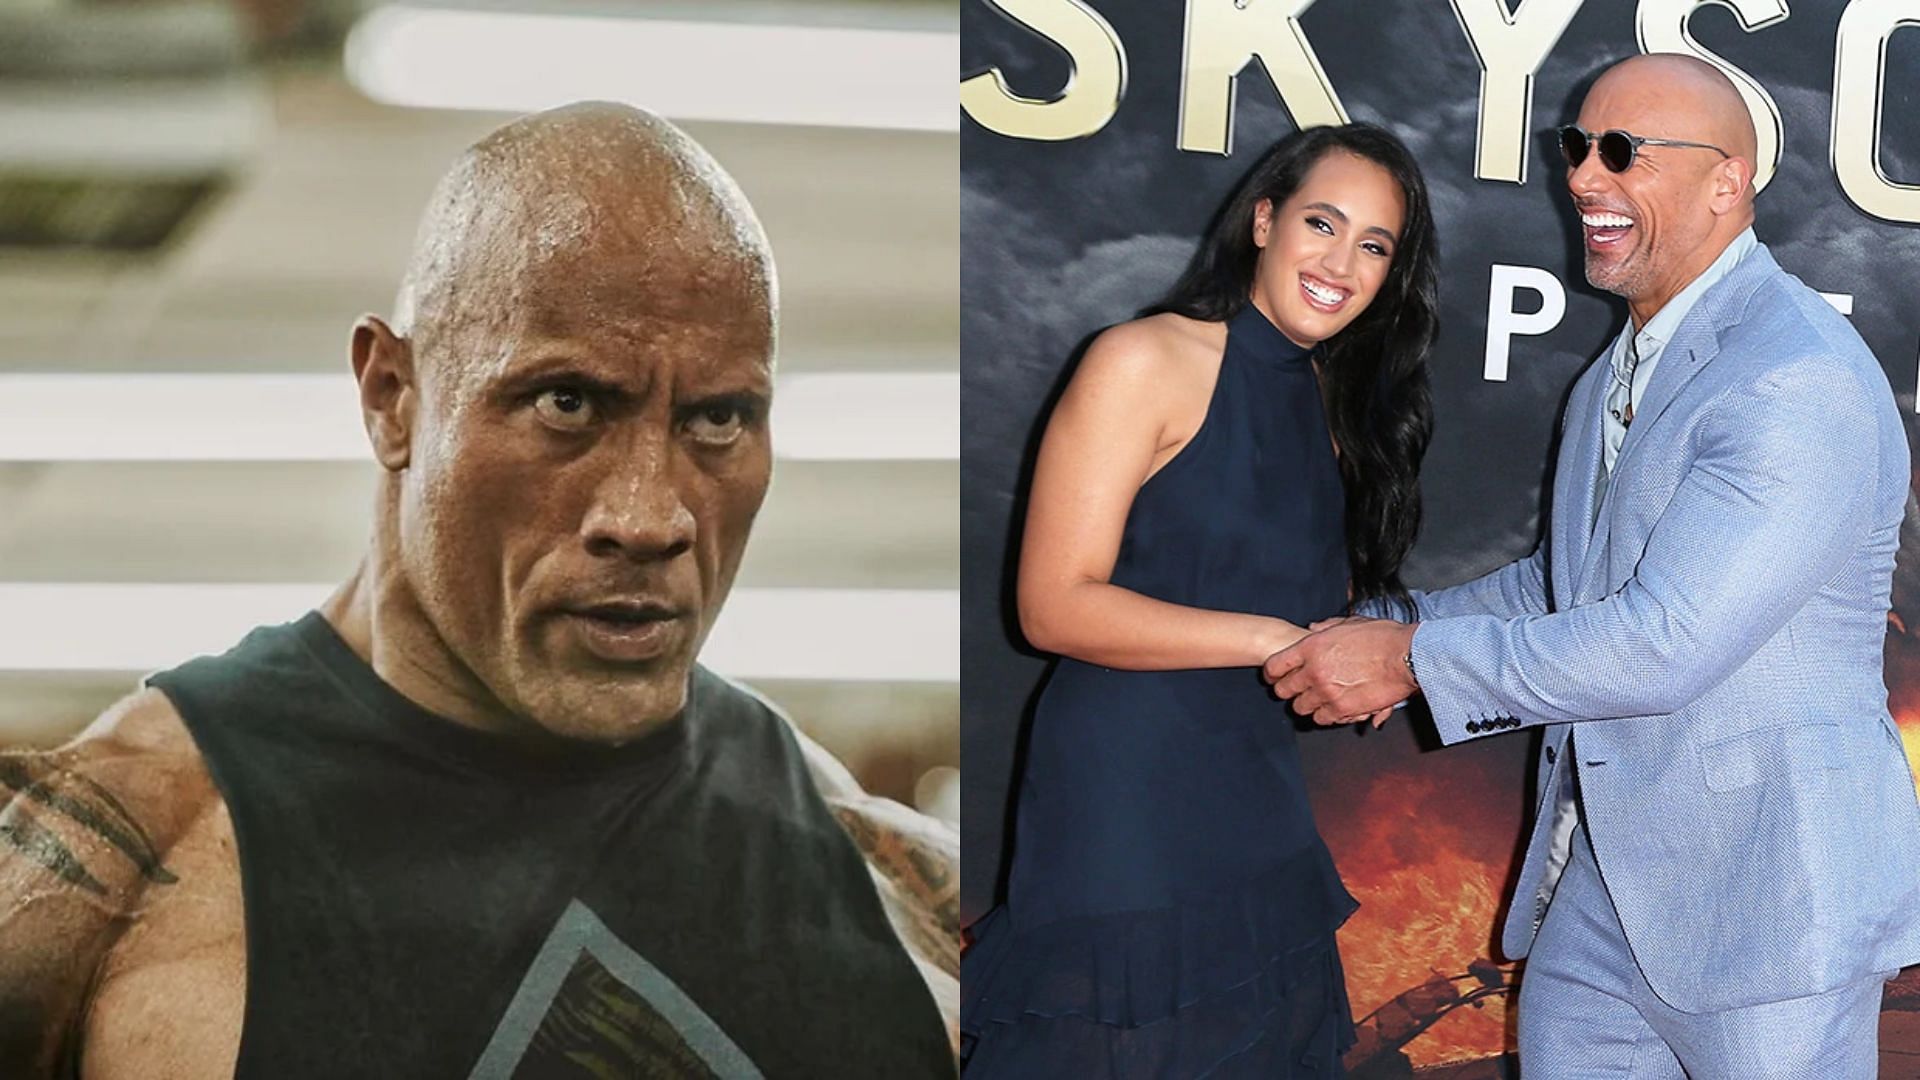 The Rock's daughter kidnaps 19-year-old WWE star live on TV